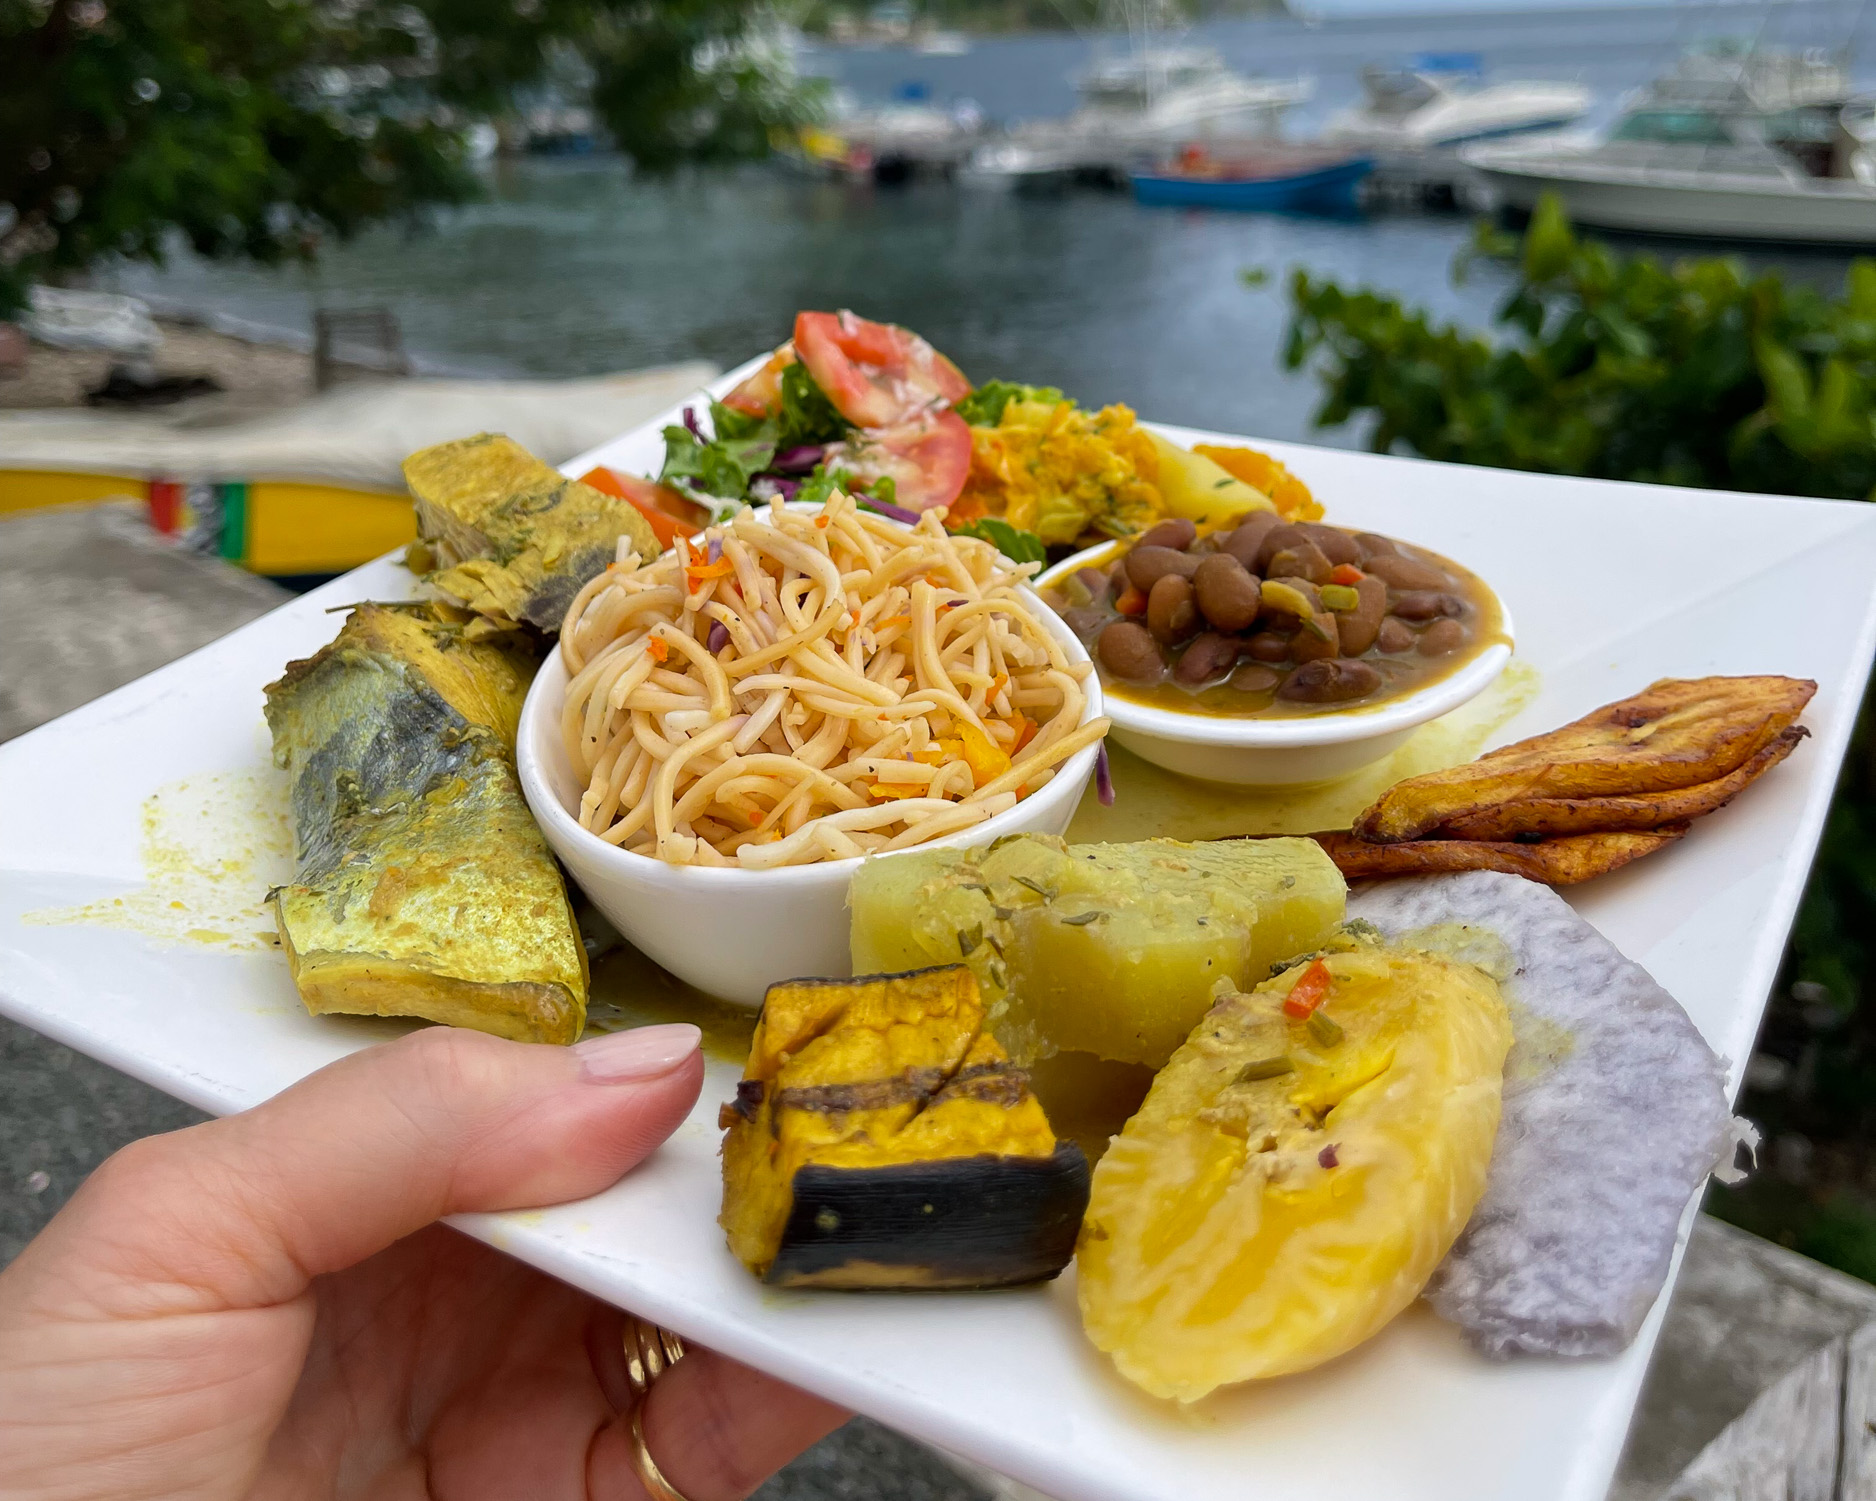 Appetite is growing for culinary tourism in Ghana